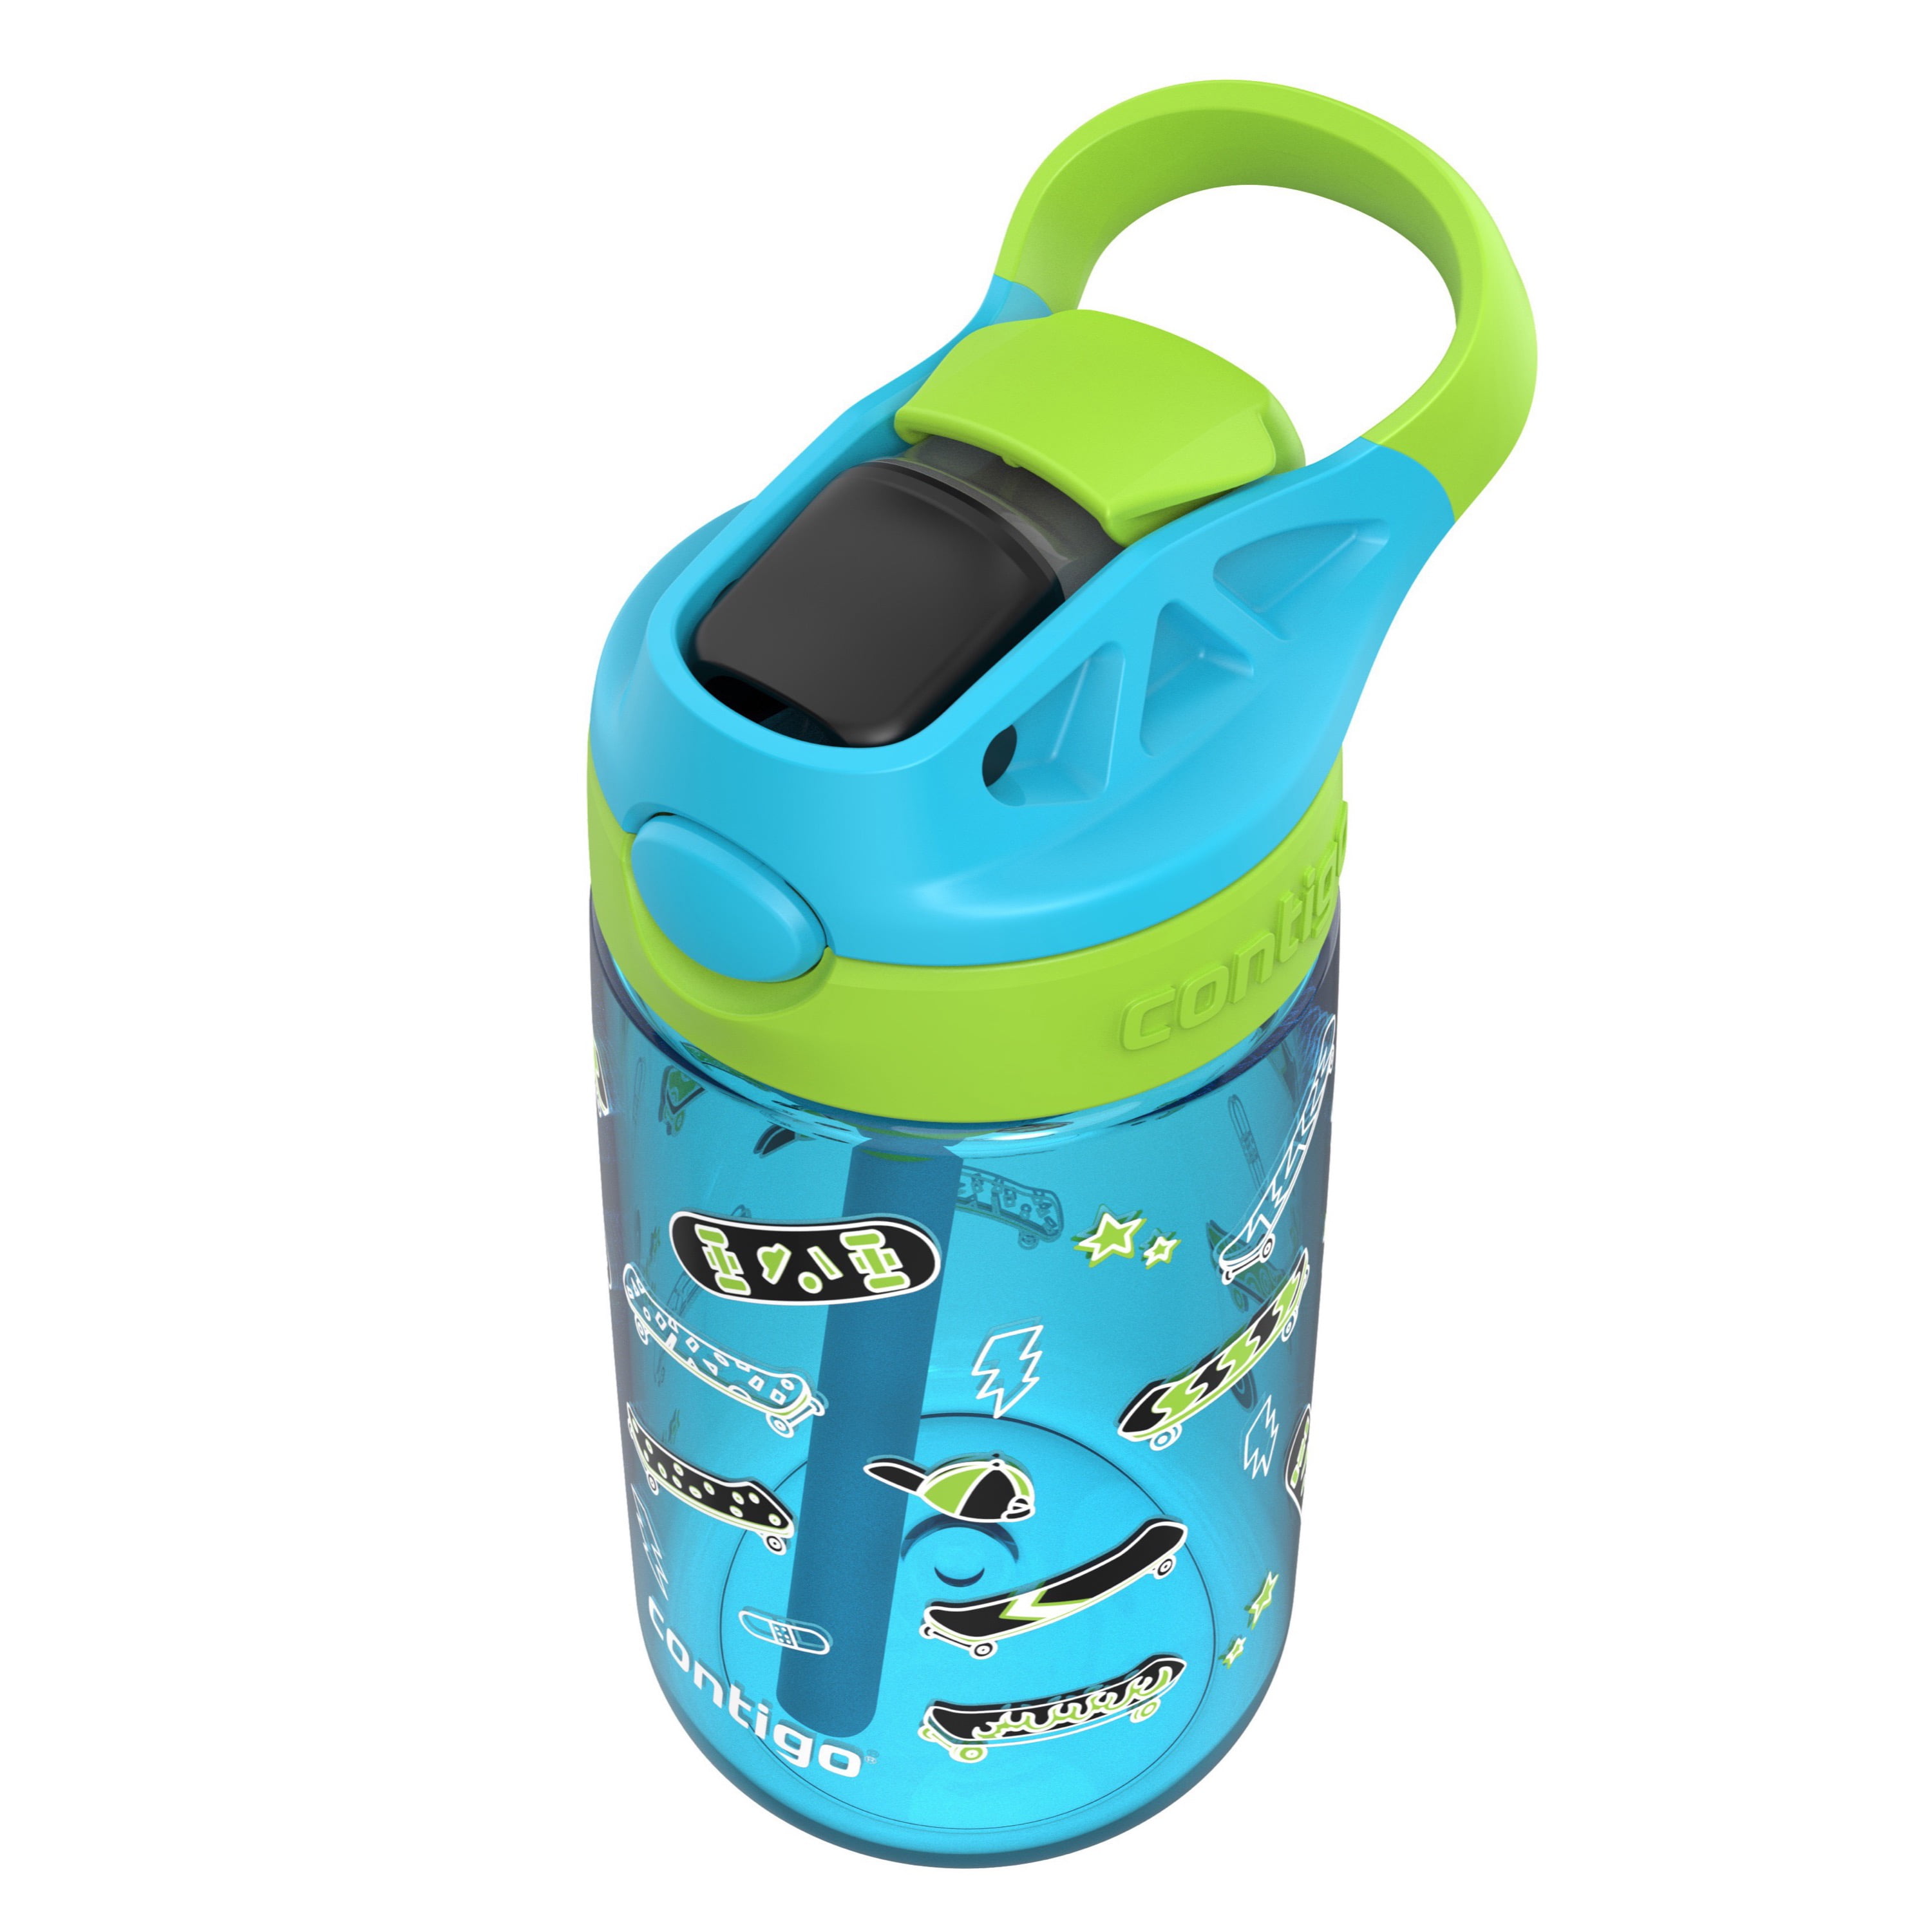 Save 40% on Contigo & Reduce Kids' Water Bottles (Today only)